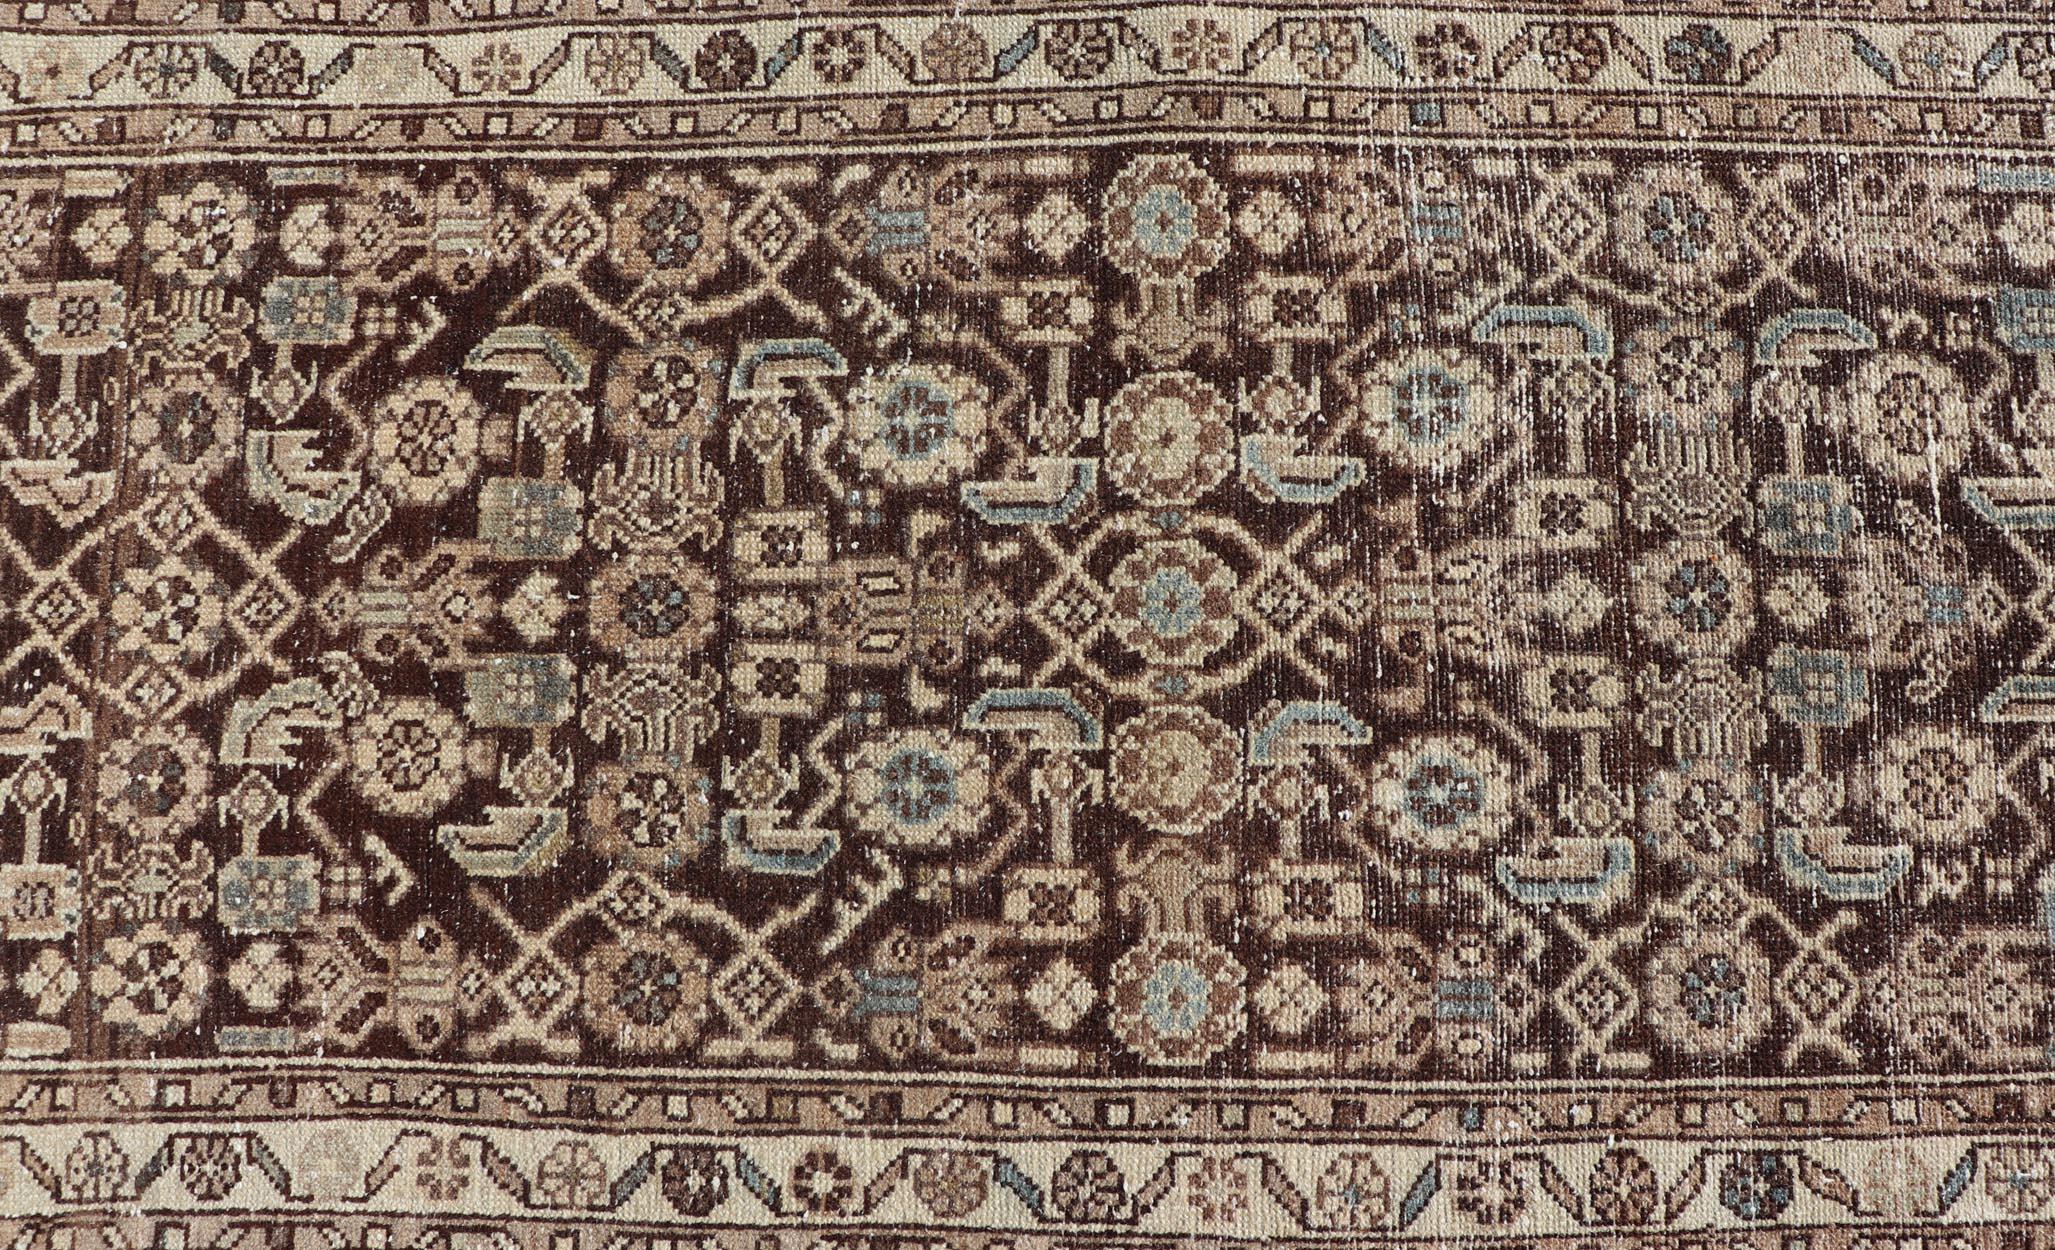 Antique Persian Hamadan Runner in Warm Tones of Grey, Brown, and L. Brown For Sale 2